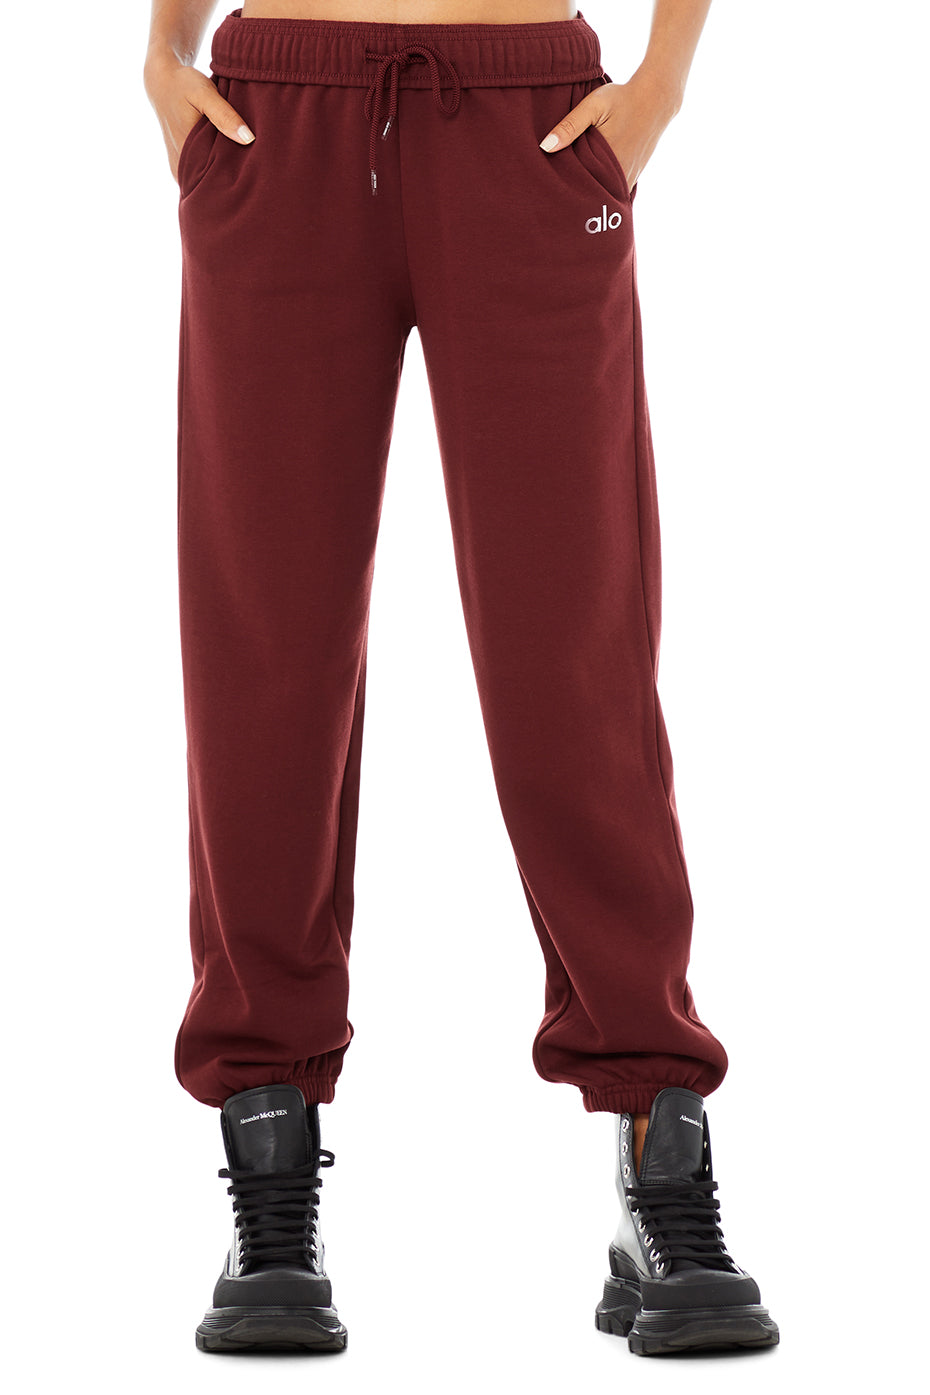 Accolade Sweatpant in Cranberry by Alo Yoga - Work Well Daily